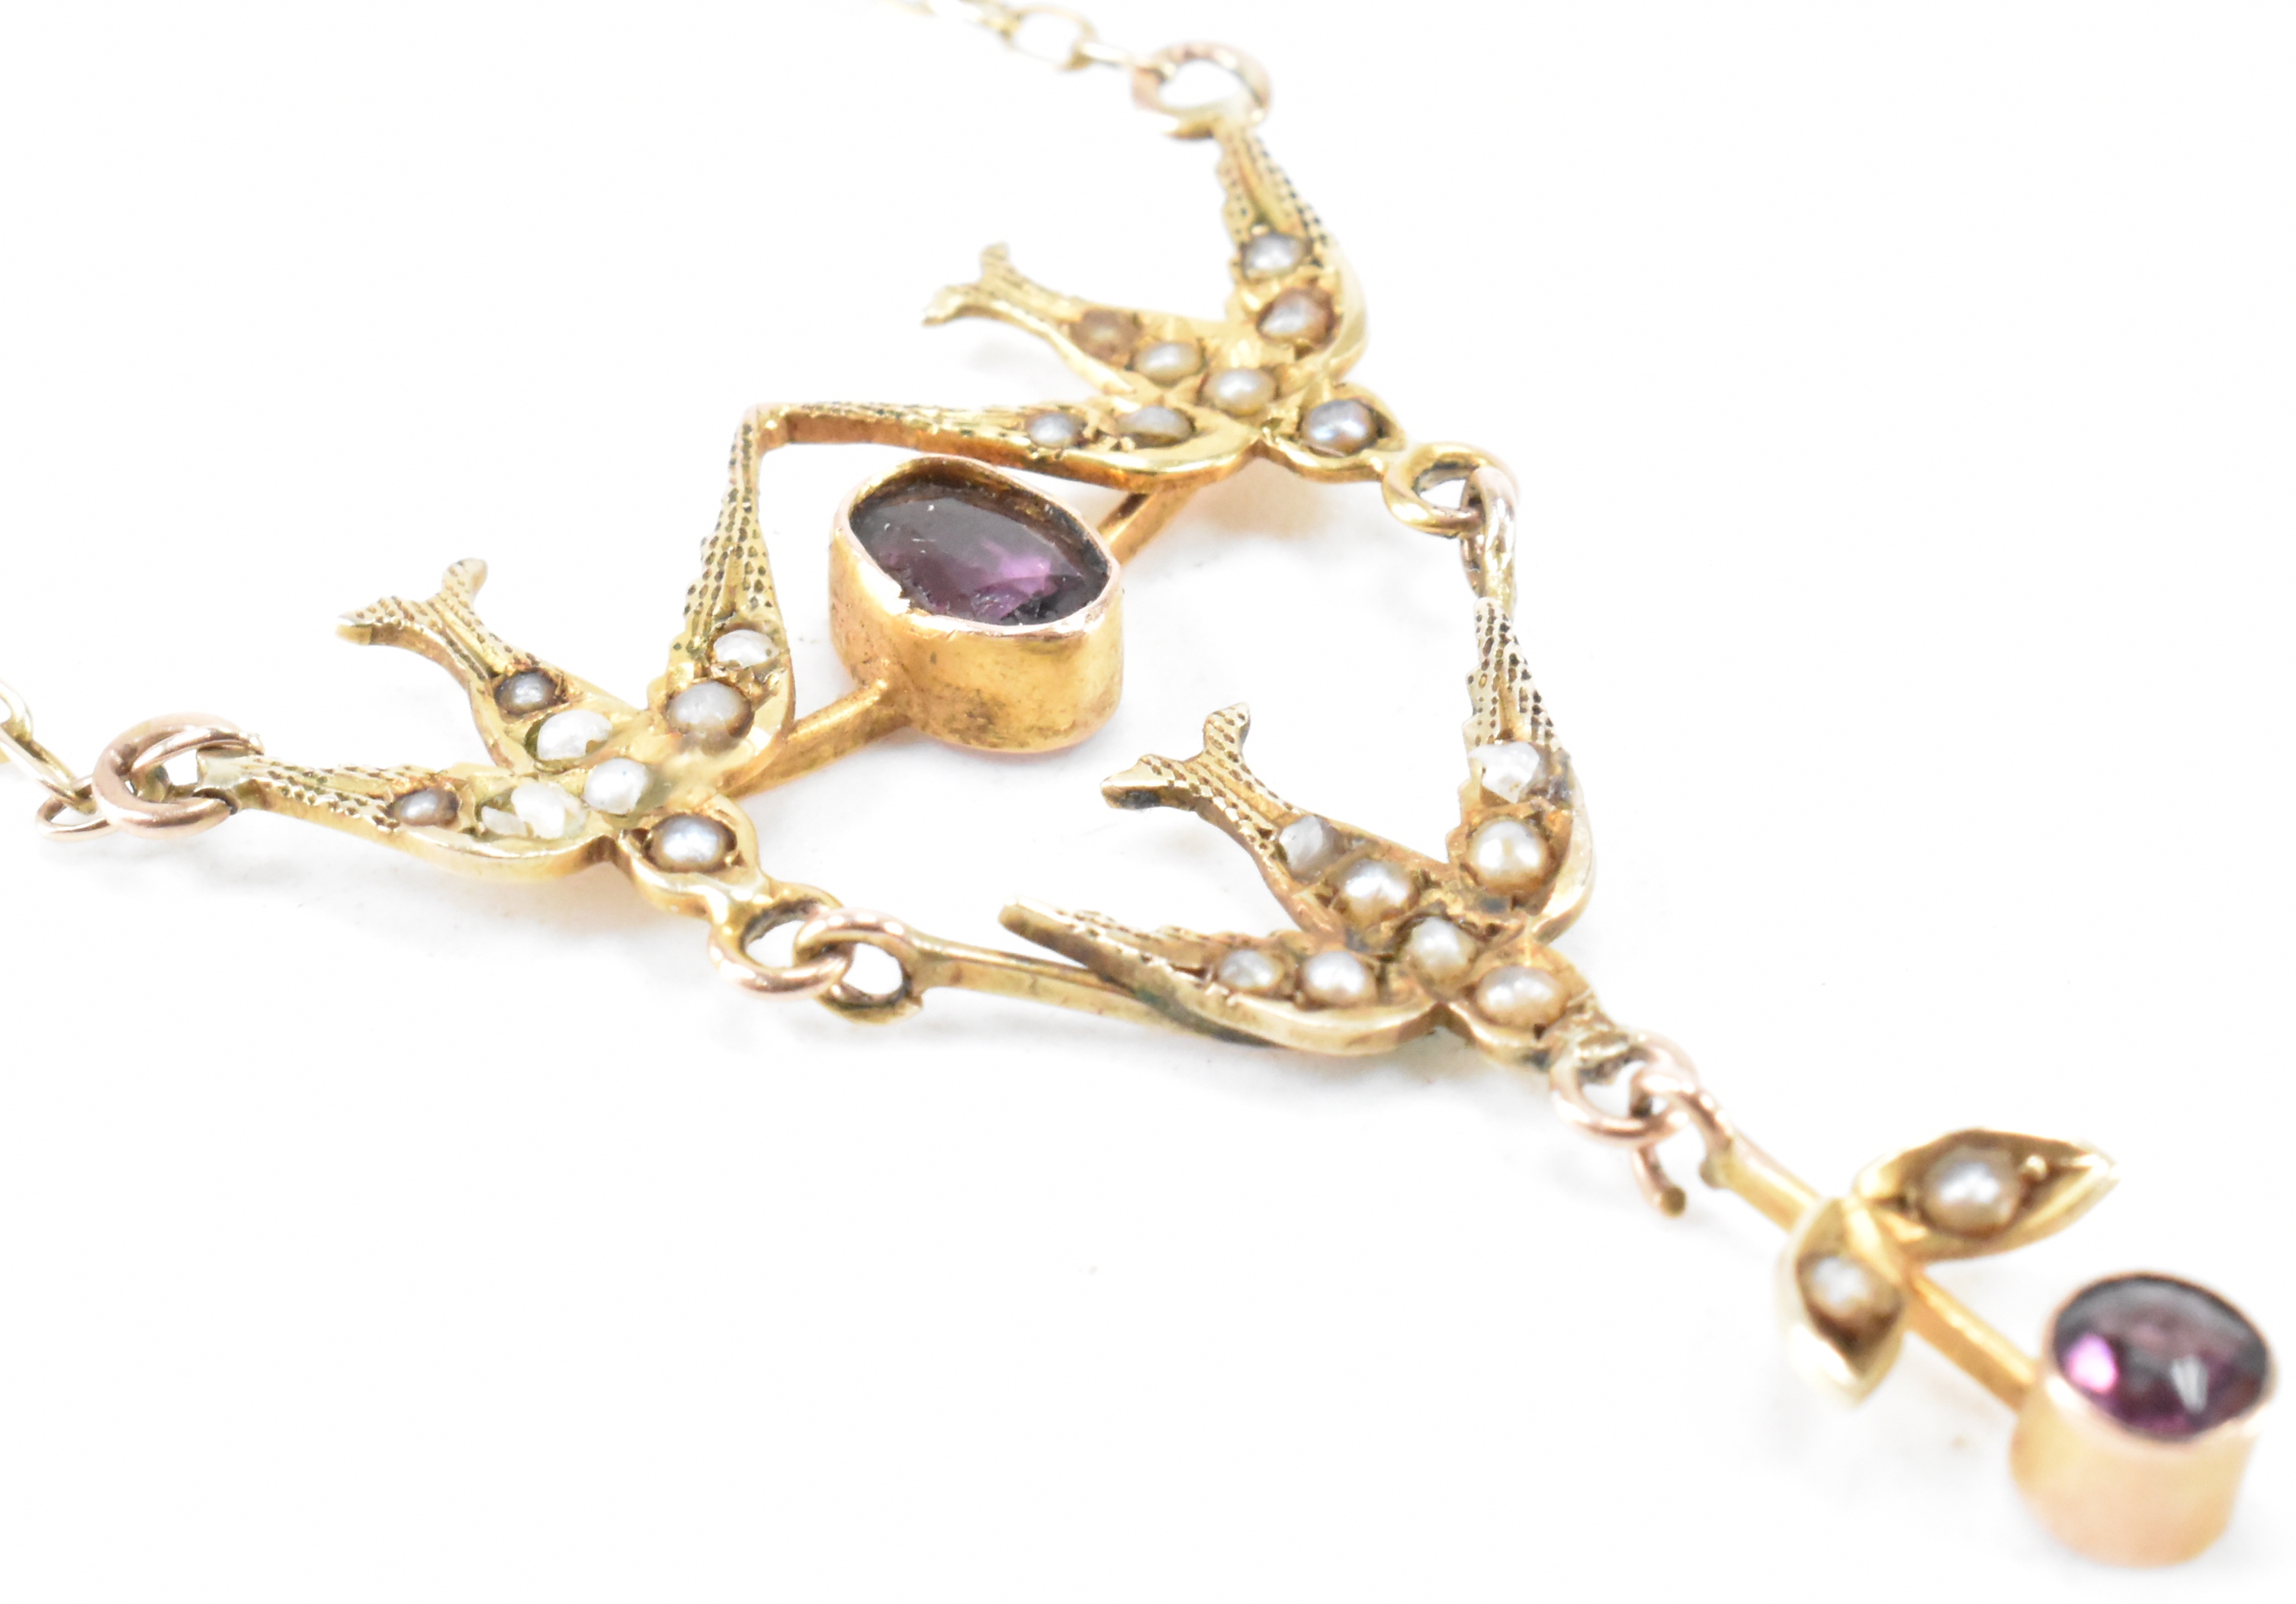 VICTORIAN GOLD SEEDPEARL & PASTE SWALLOW NECKLACE - Image 4 of 9